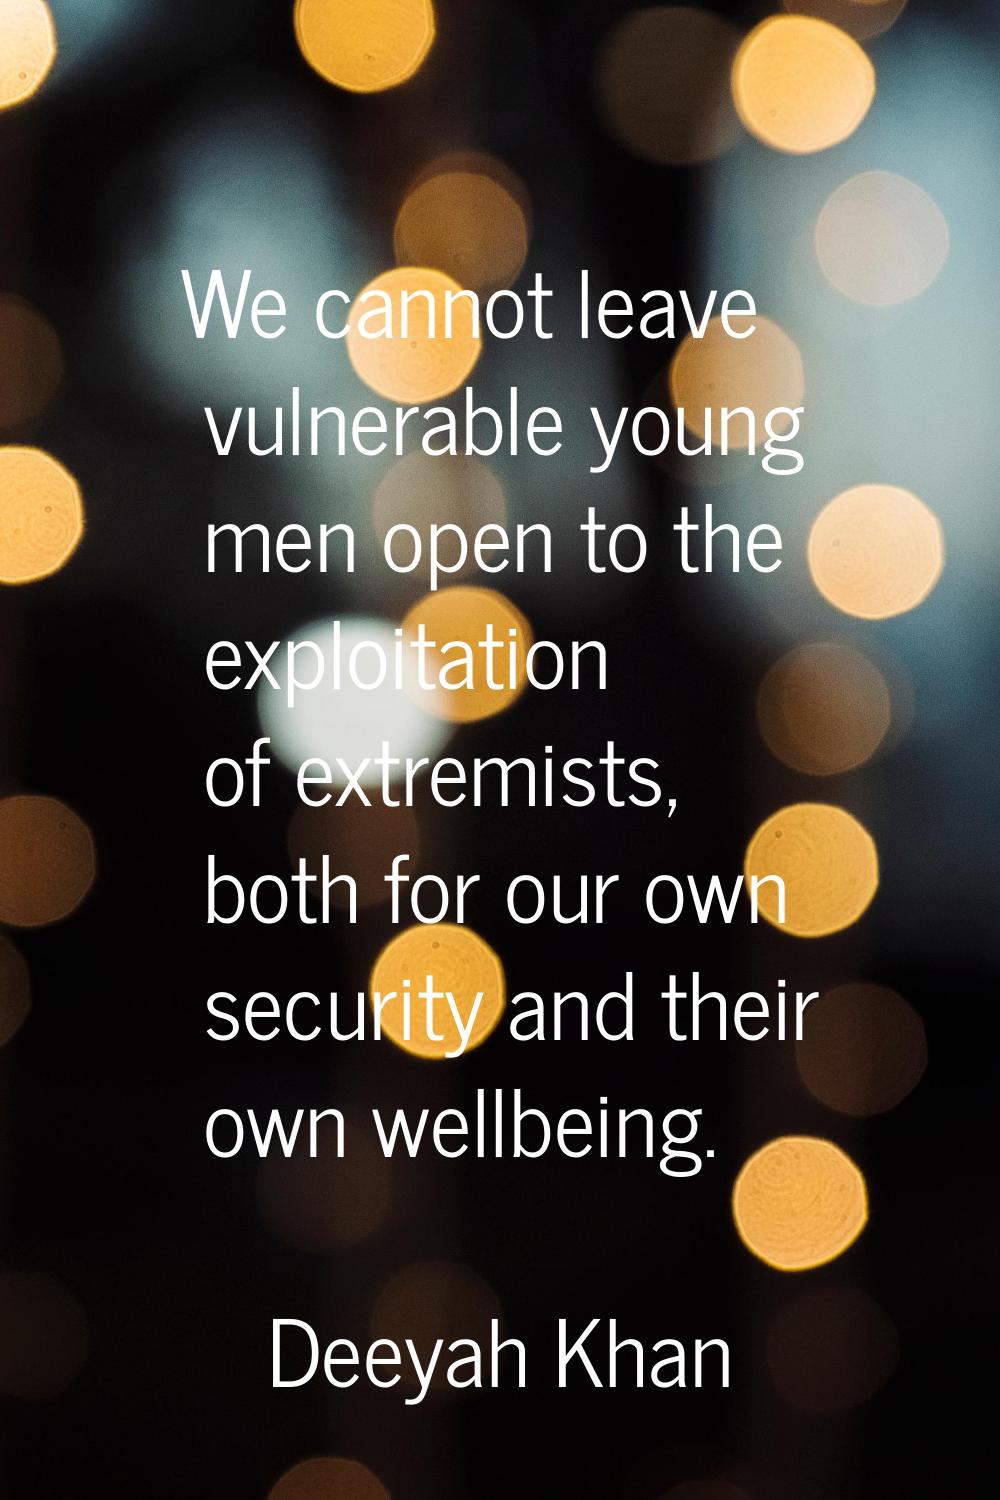 We cannot leave vulnerable young men open to the exploitation of extremists, both for our own secur